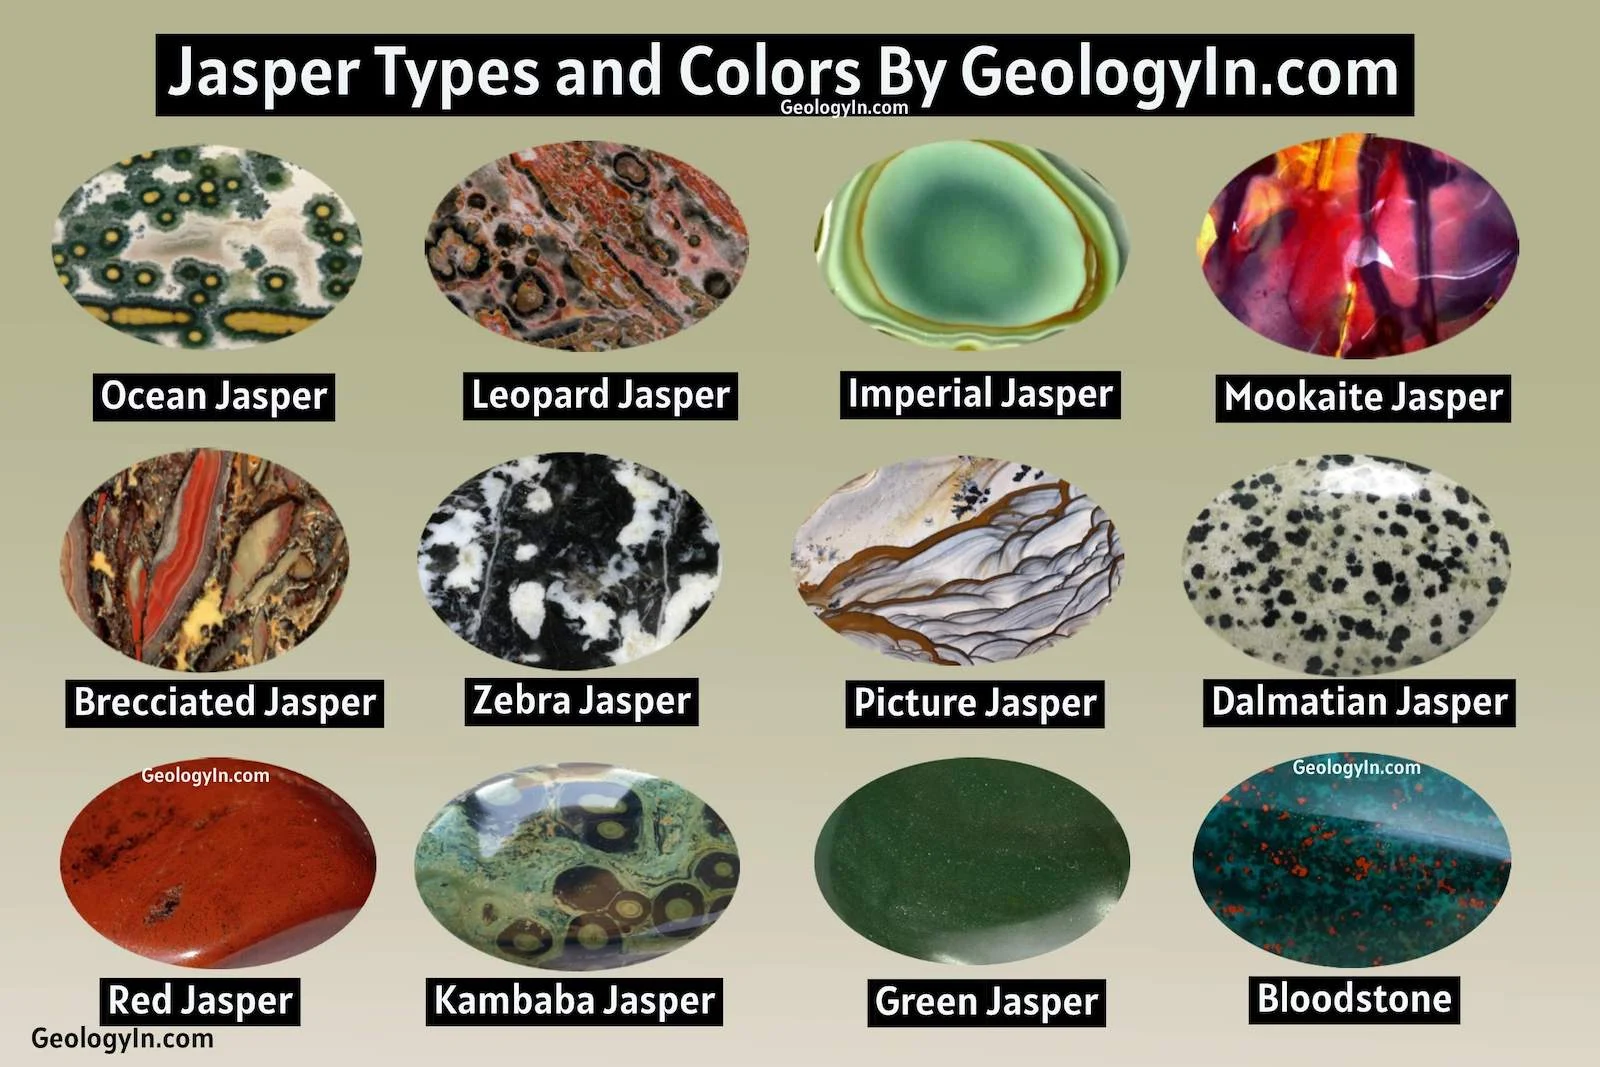 Jasper Types and Colors